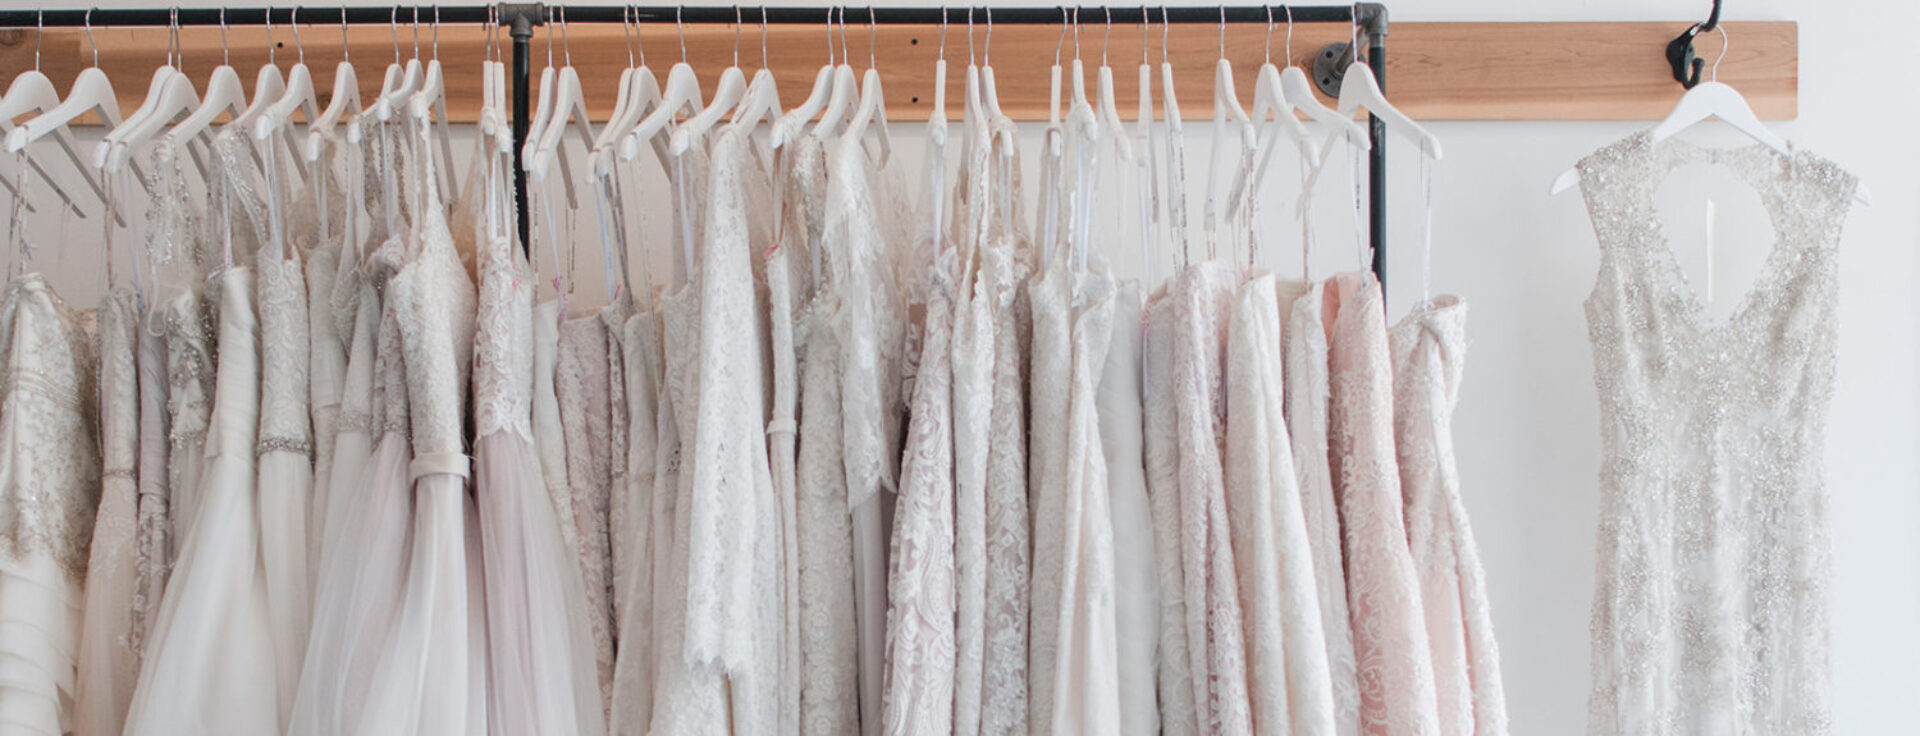 A long shot of the white wedding frocks hanging in a row